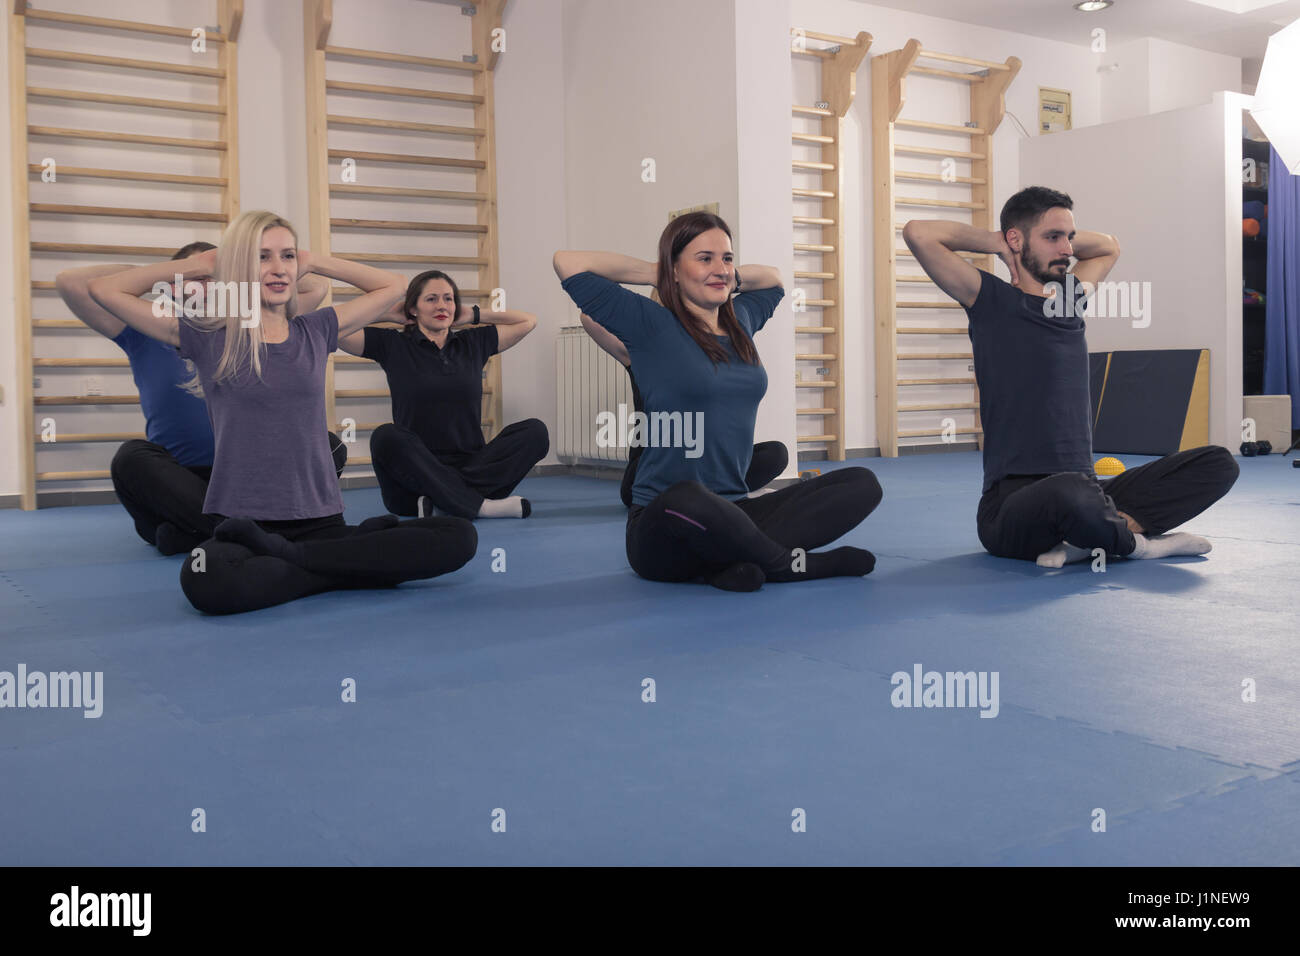 group, six people, warm up, stretch, lying laying floor Stock Photo